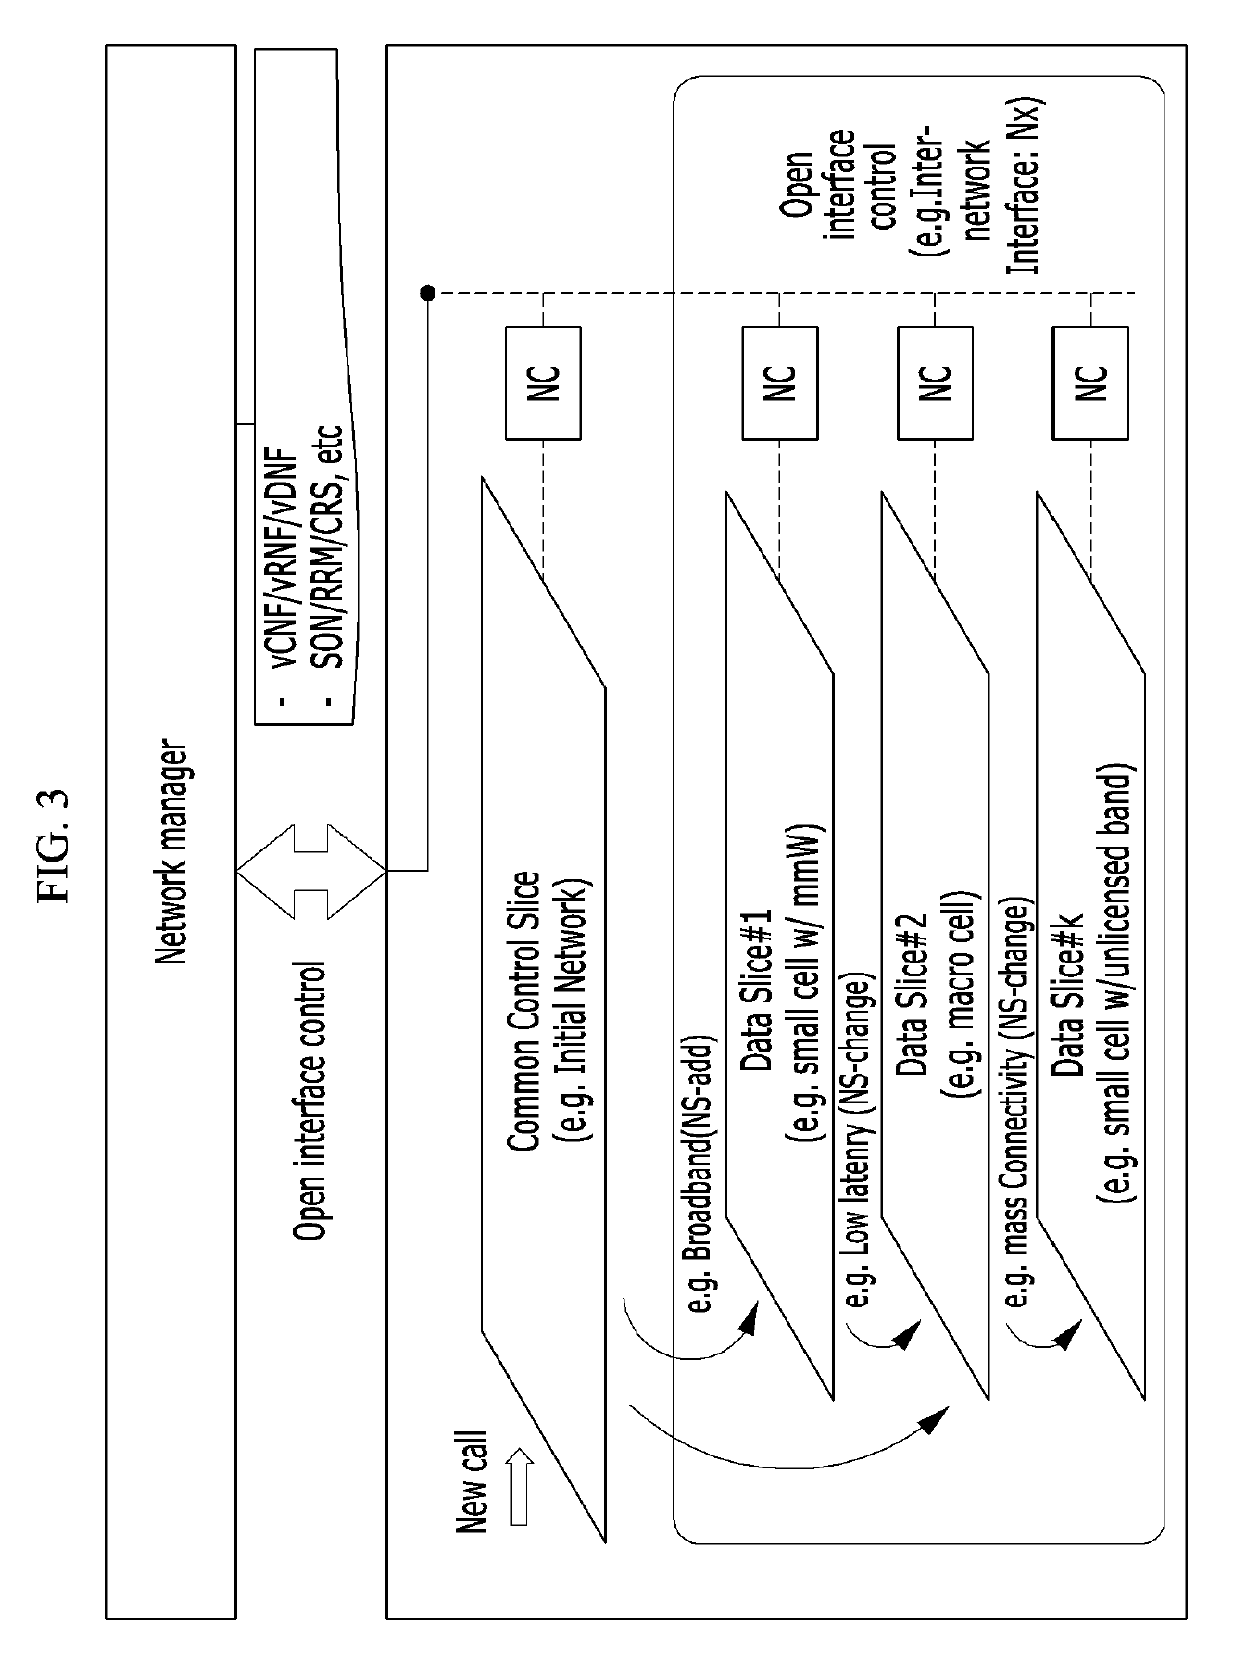 Mobile communication network system and method for composing network component configurations